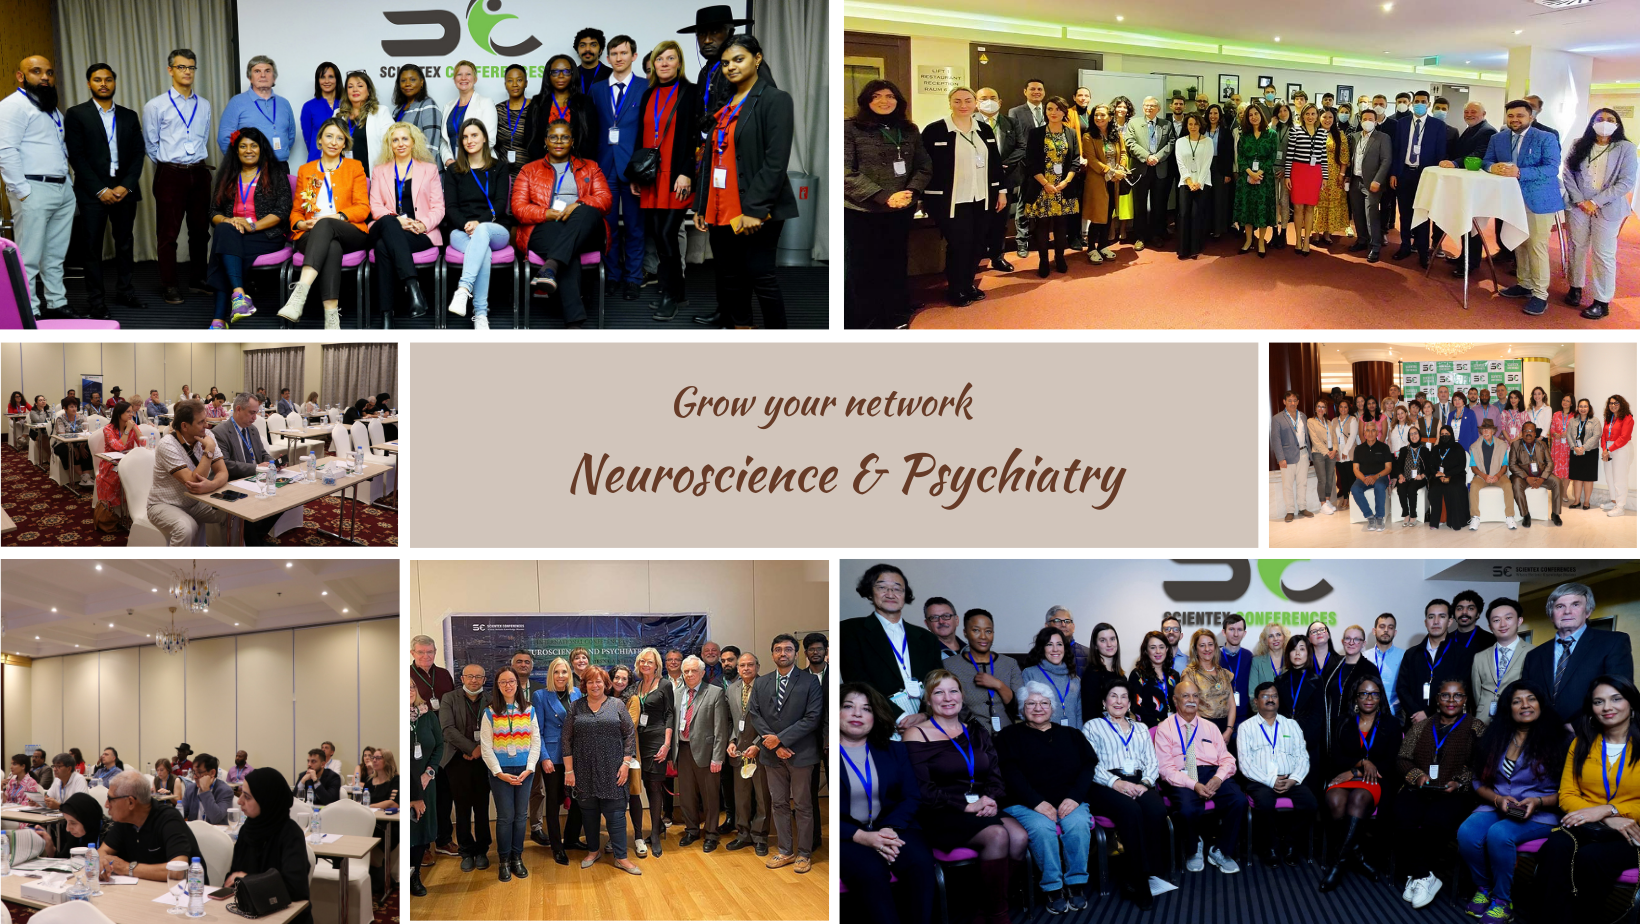 Neuroscience Conference